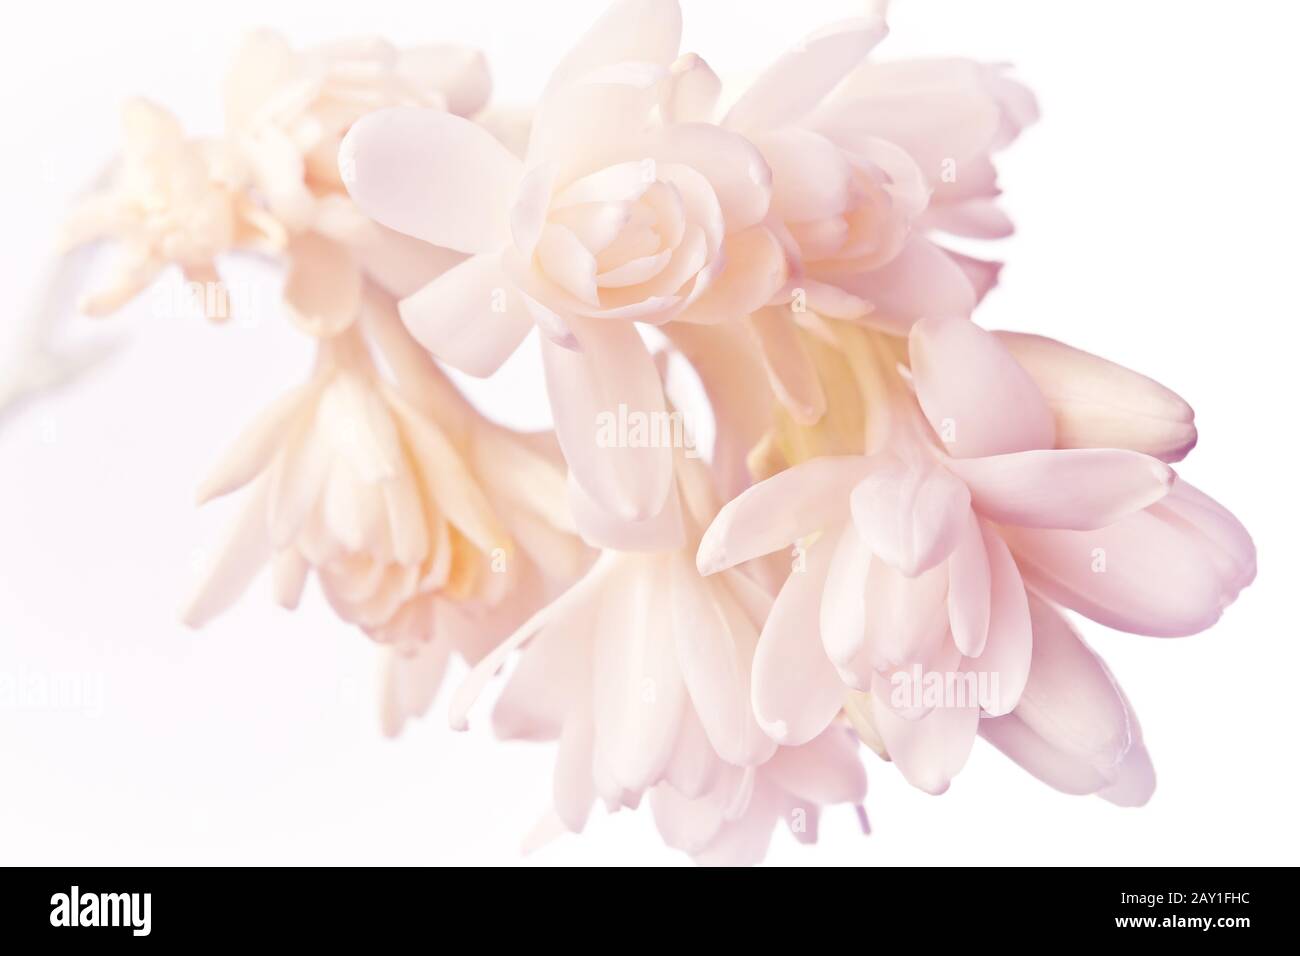 Exotic white and pink tuberose flowers in soft light, nostalgic and romantic background texture. Stock Photo